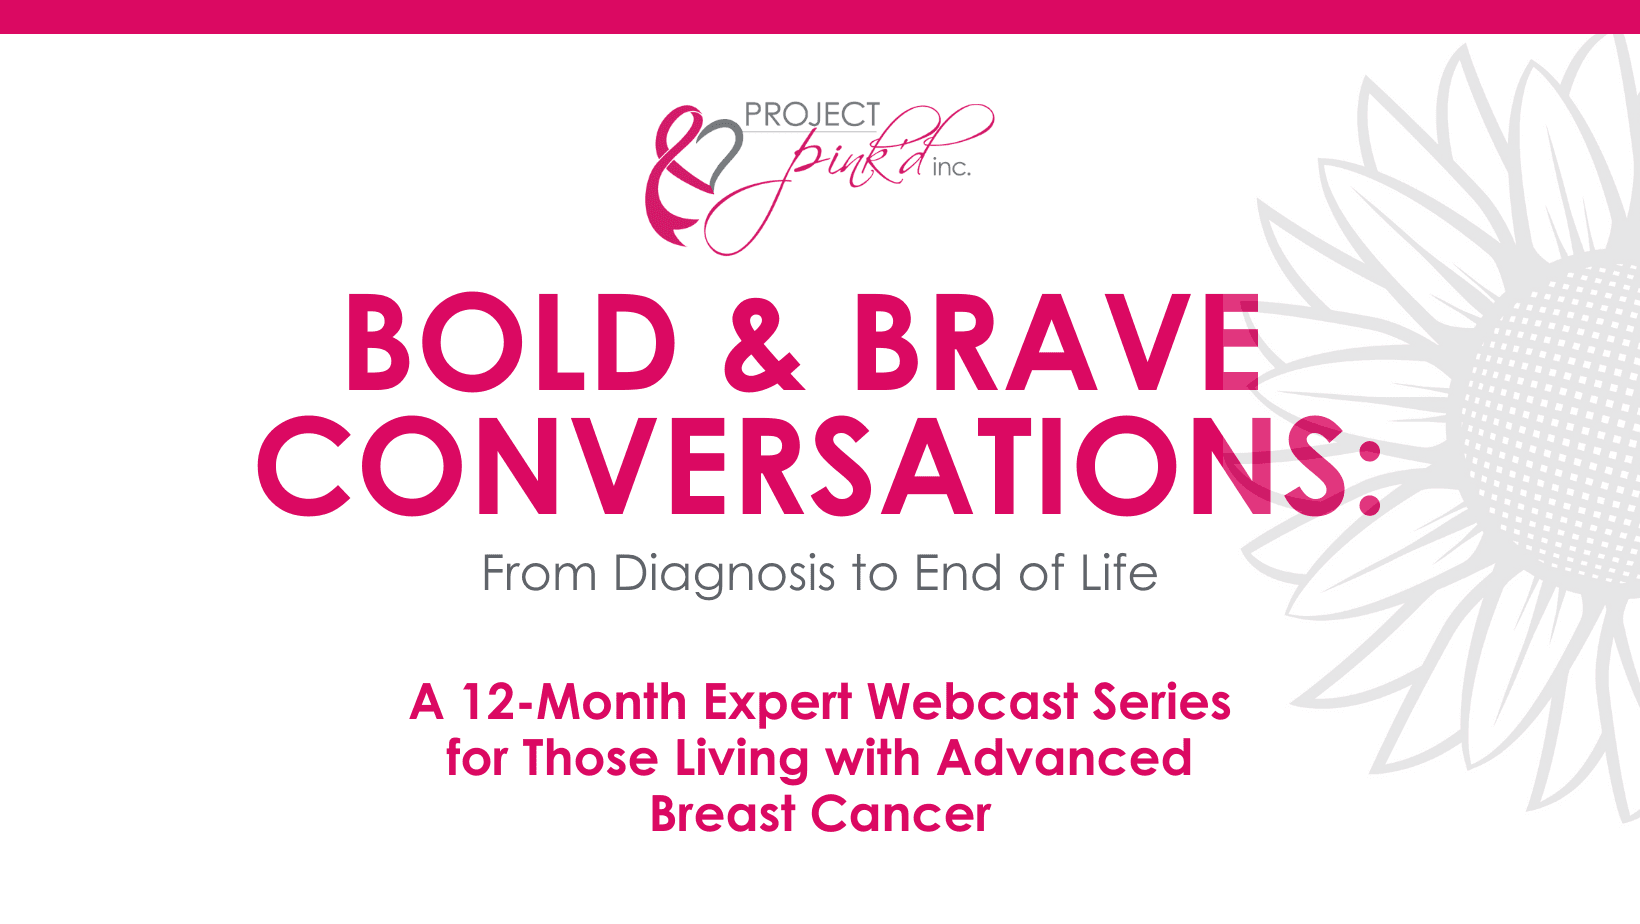 Project Pink’d Offers Complimentary 12-Month Expert Webcast Series for Those Living with Advanced Breast Cancer 